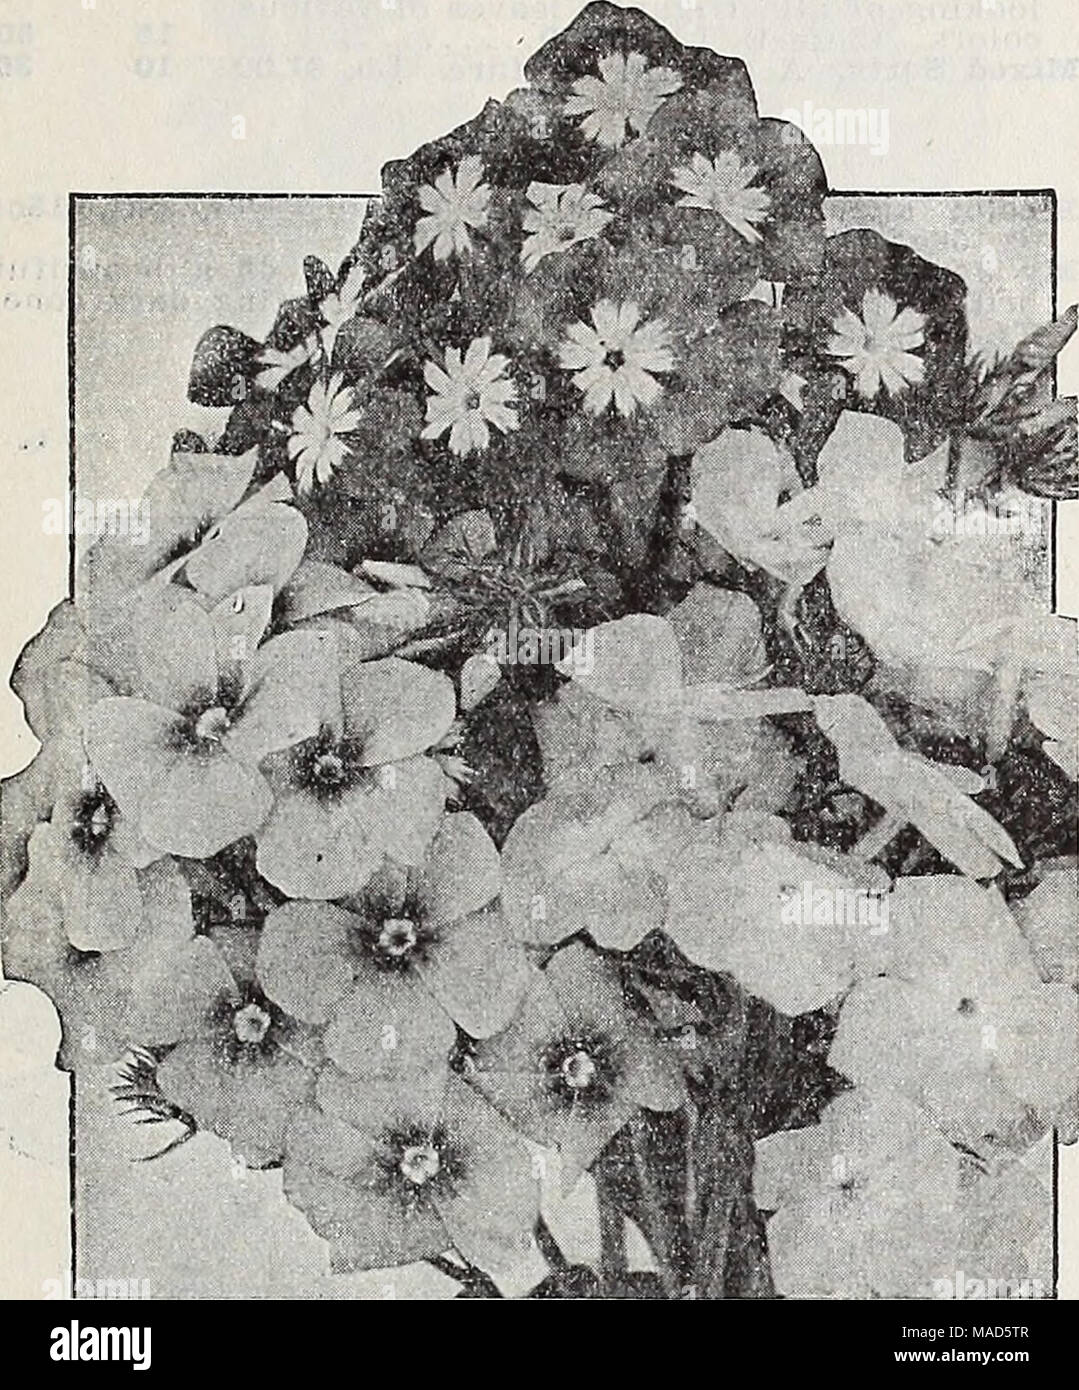 . Dreer's wholesale catalog for florists : winter spring summer 1937 . Phlox Drummondi grandlflora Phlox Drummondi grandiflora These are fine summer-flowering annuals and make excellent pot plants for spring sales. The grandlflora varieties are noted for their lovely large blooms which are arranged in truly giant trusses and there is a con- tinuous display of color from early summer until late fall. The colors we list have all been chosen for their purity and charm. Tr. pkt. Oz. Bright Bose $0 25 $1 00 Brilliant. Blush rose, with crimson eye.. 25 1 00 Fiery Scarlet 25 1 00 Primrose (Isabellina Stock Photo